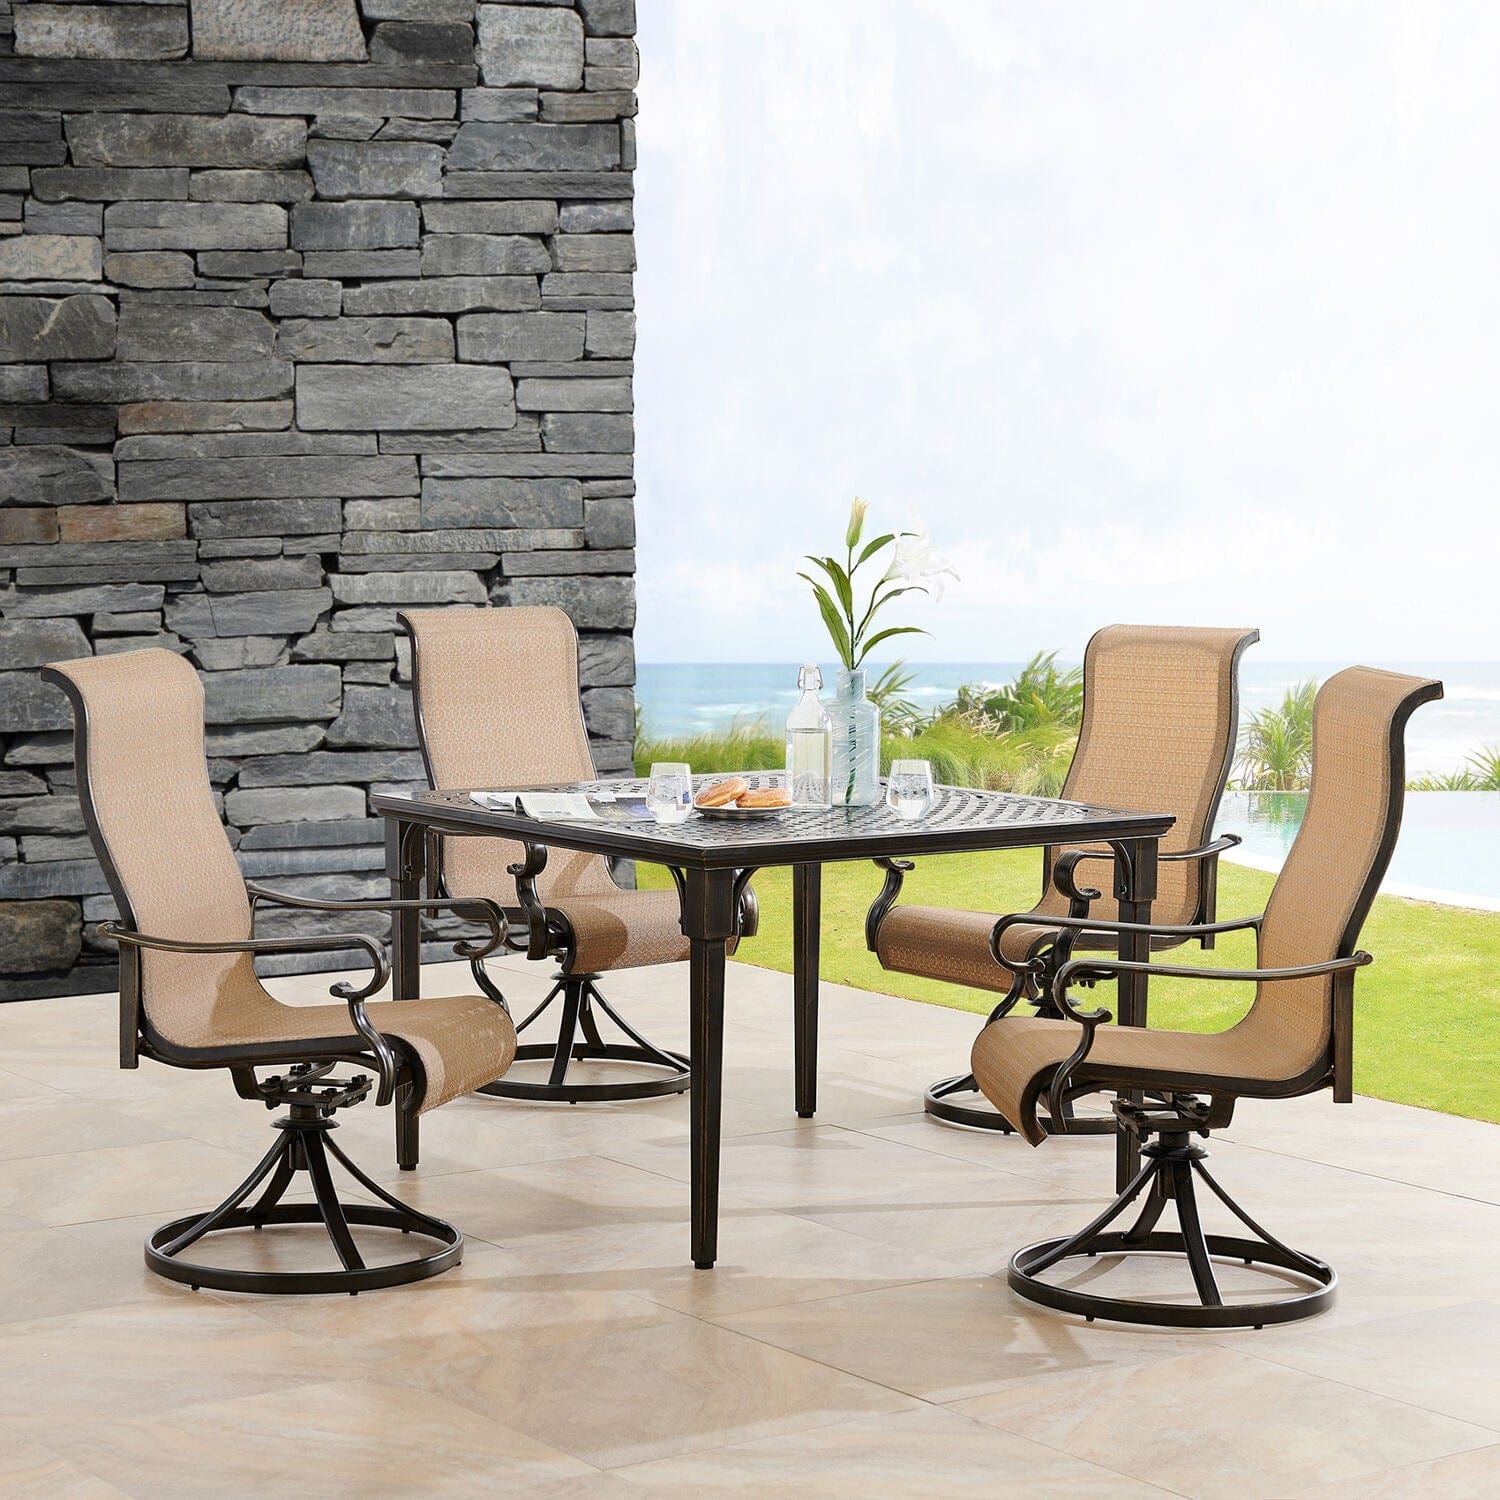 Hanover Outdoor Dining Set Hanover Brigantine 5 Piece Outdoor Dining Set with 4 Contoured-Sling Swivel Rockers and a 42-In. Square Cast-Top Table - BRIGDN5PCSWSQ